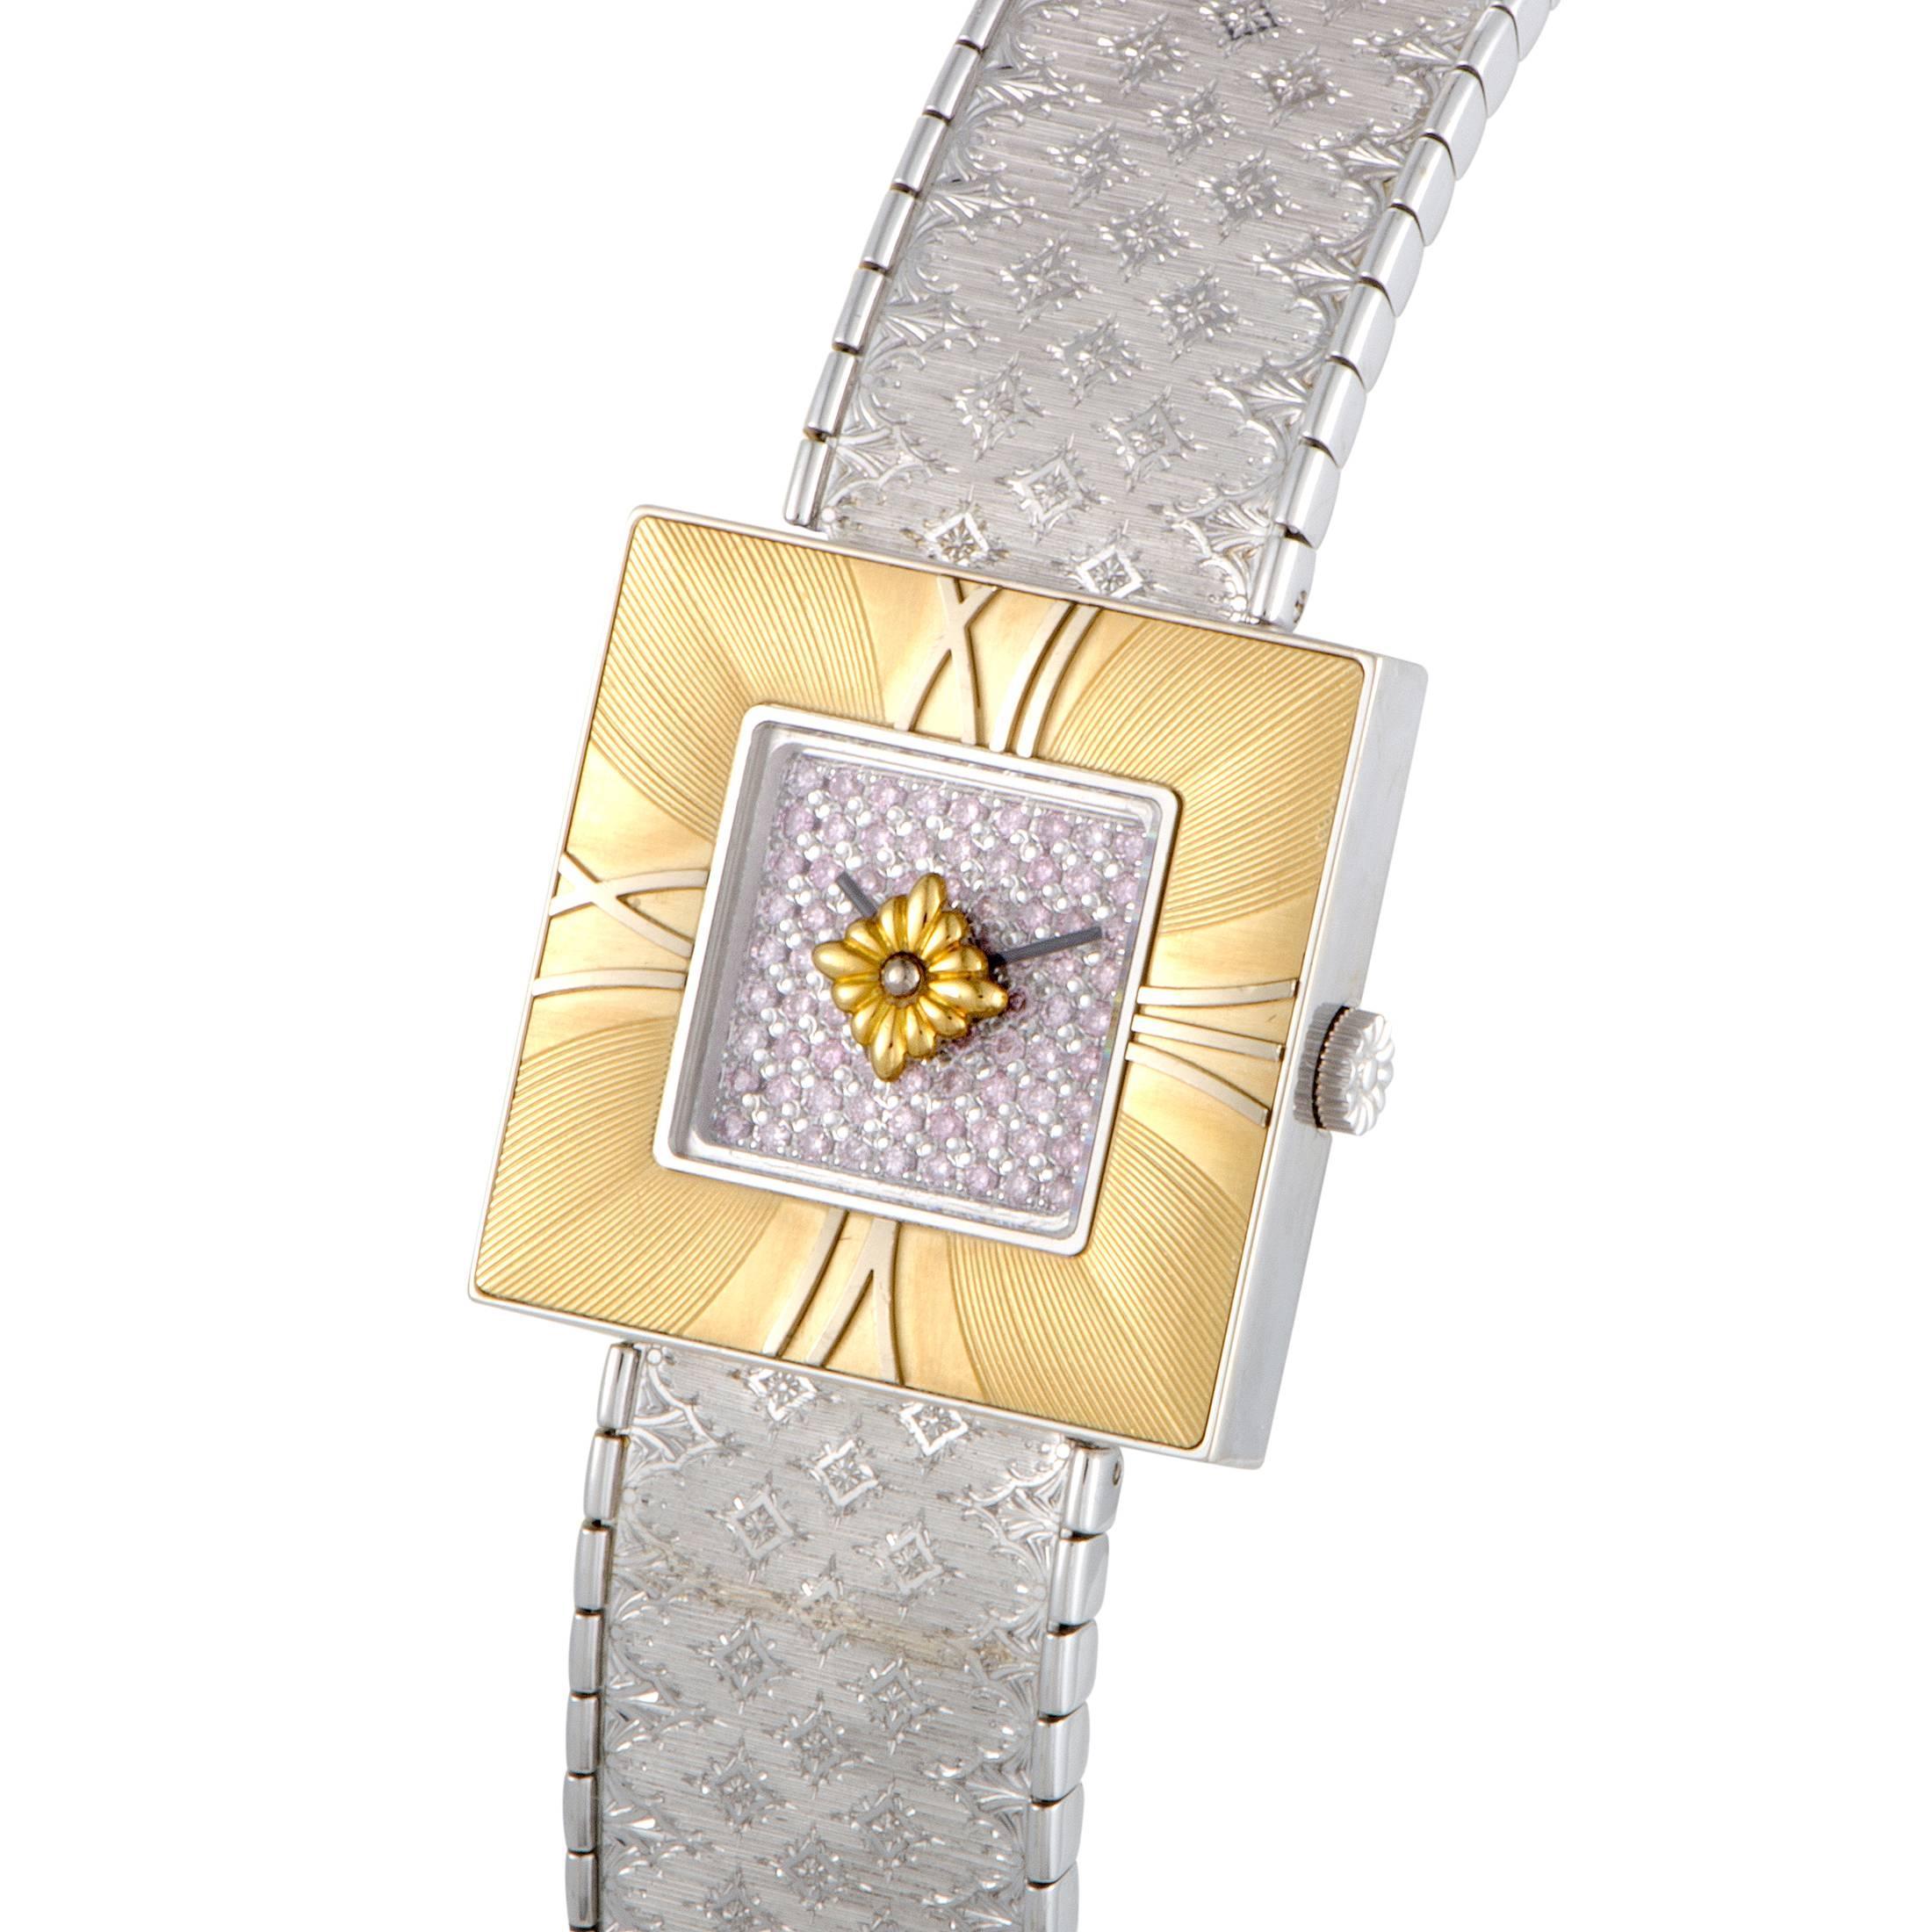 A delightful expression of feminine elegance and charming décor, this magnificent timepiece from Buccellati presents its minimalistic indications in a highly legible and wonderfully subtle manner while exuding resplendent luxury with its lavish